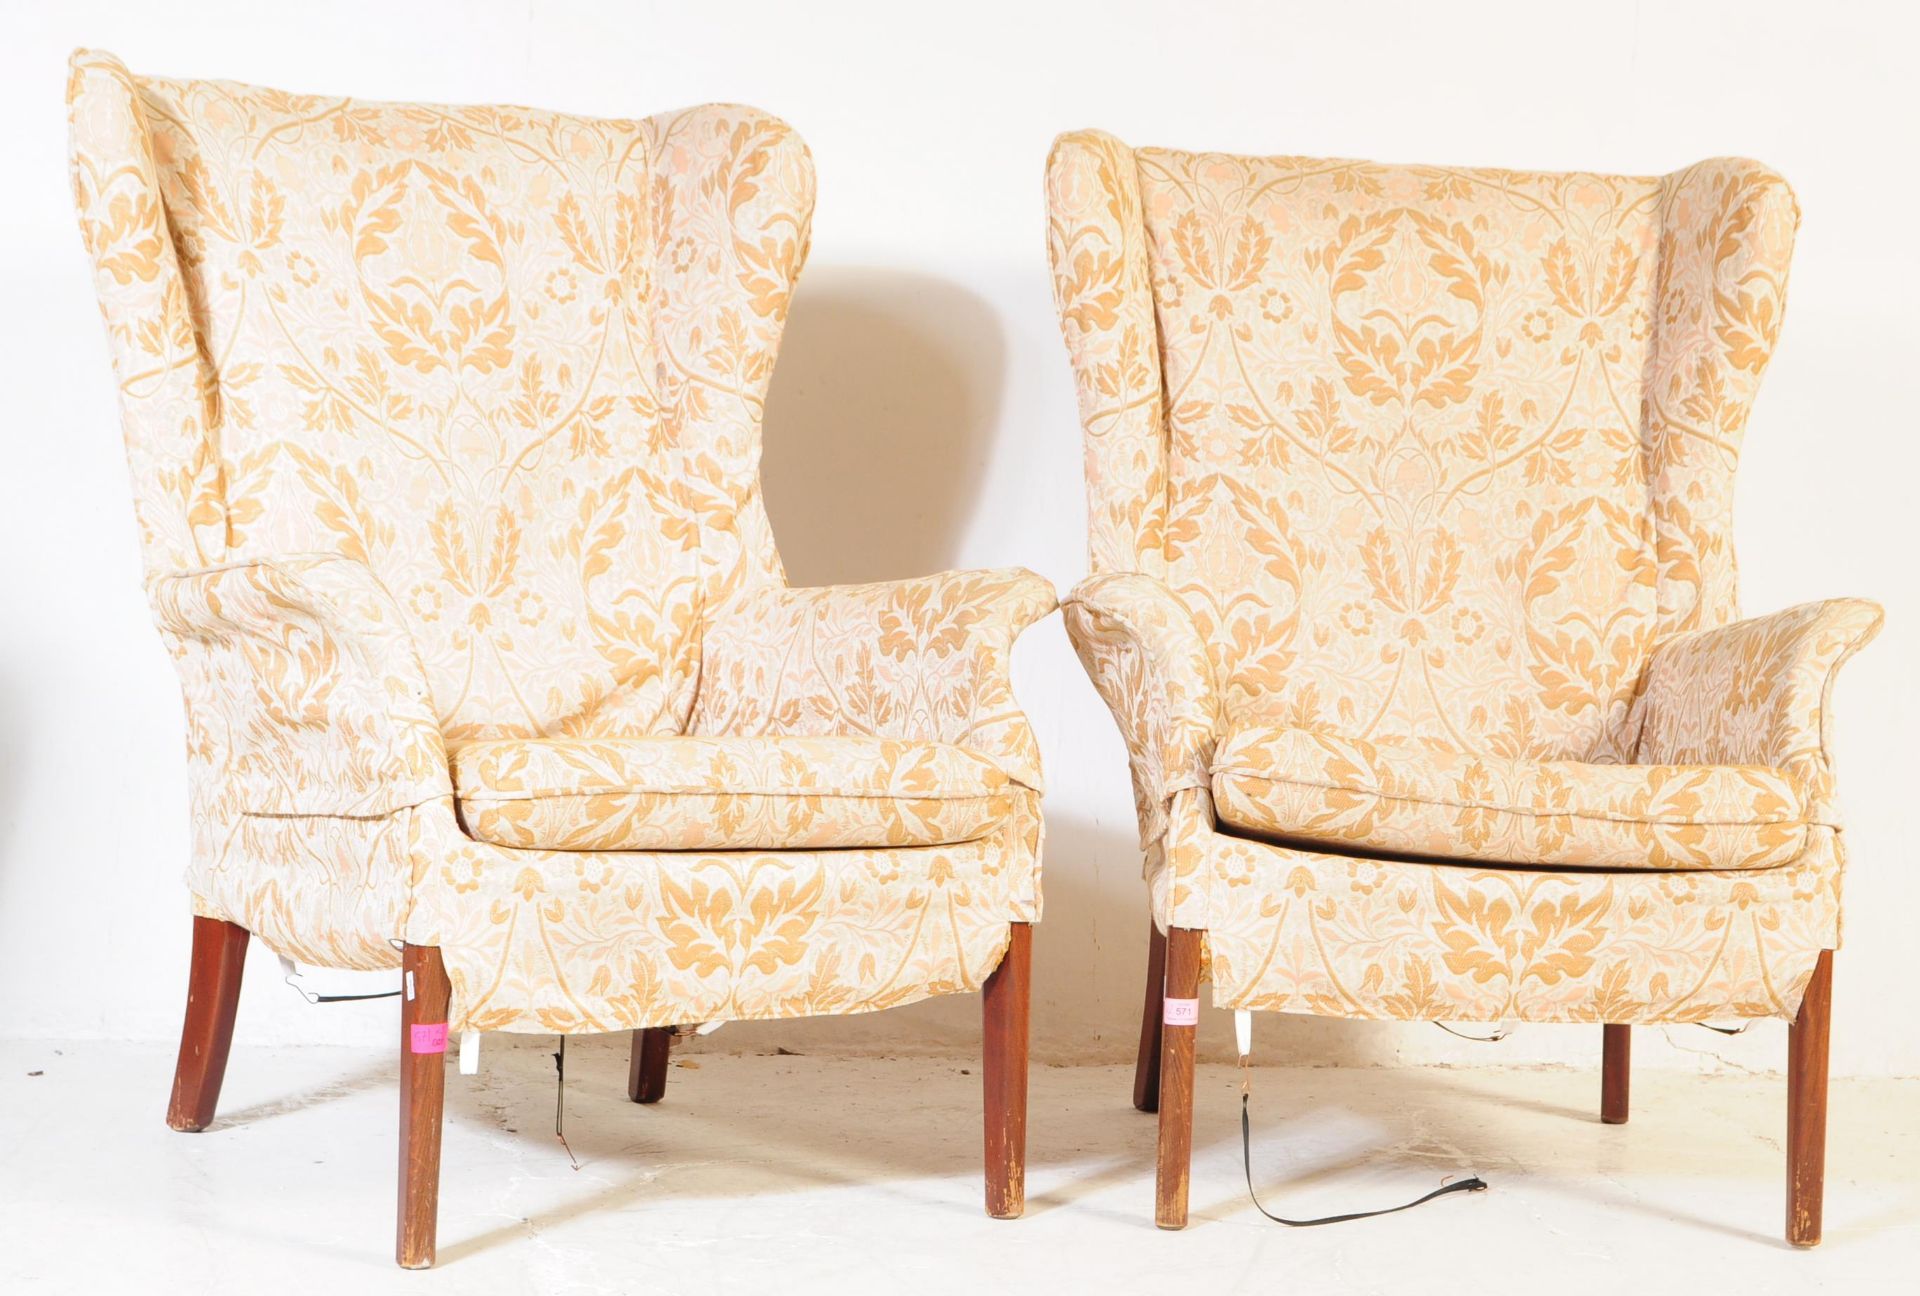 PAIR OF MID 20TH CENTURY PARKER KNOLL ARMCHAIRS